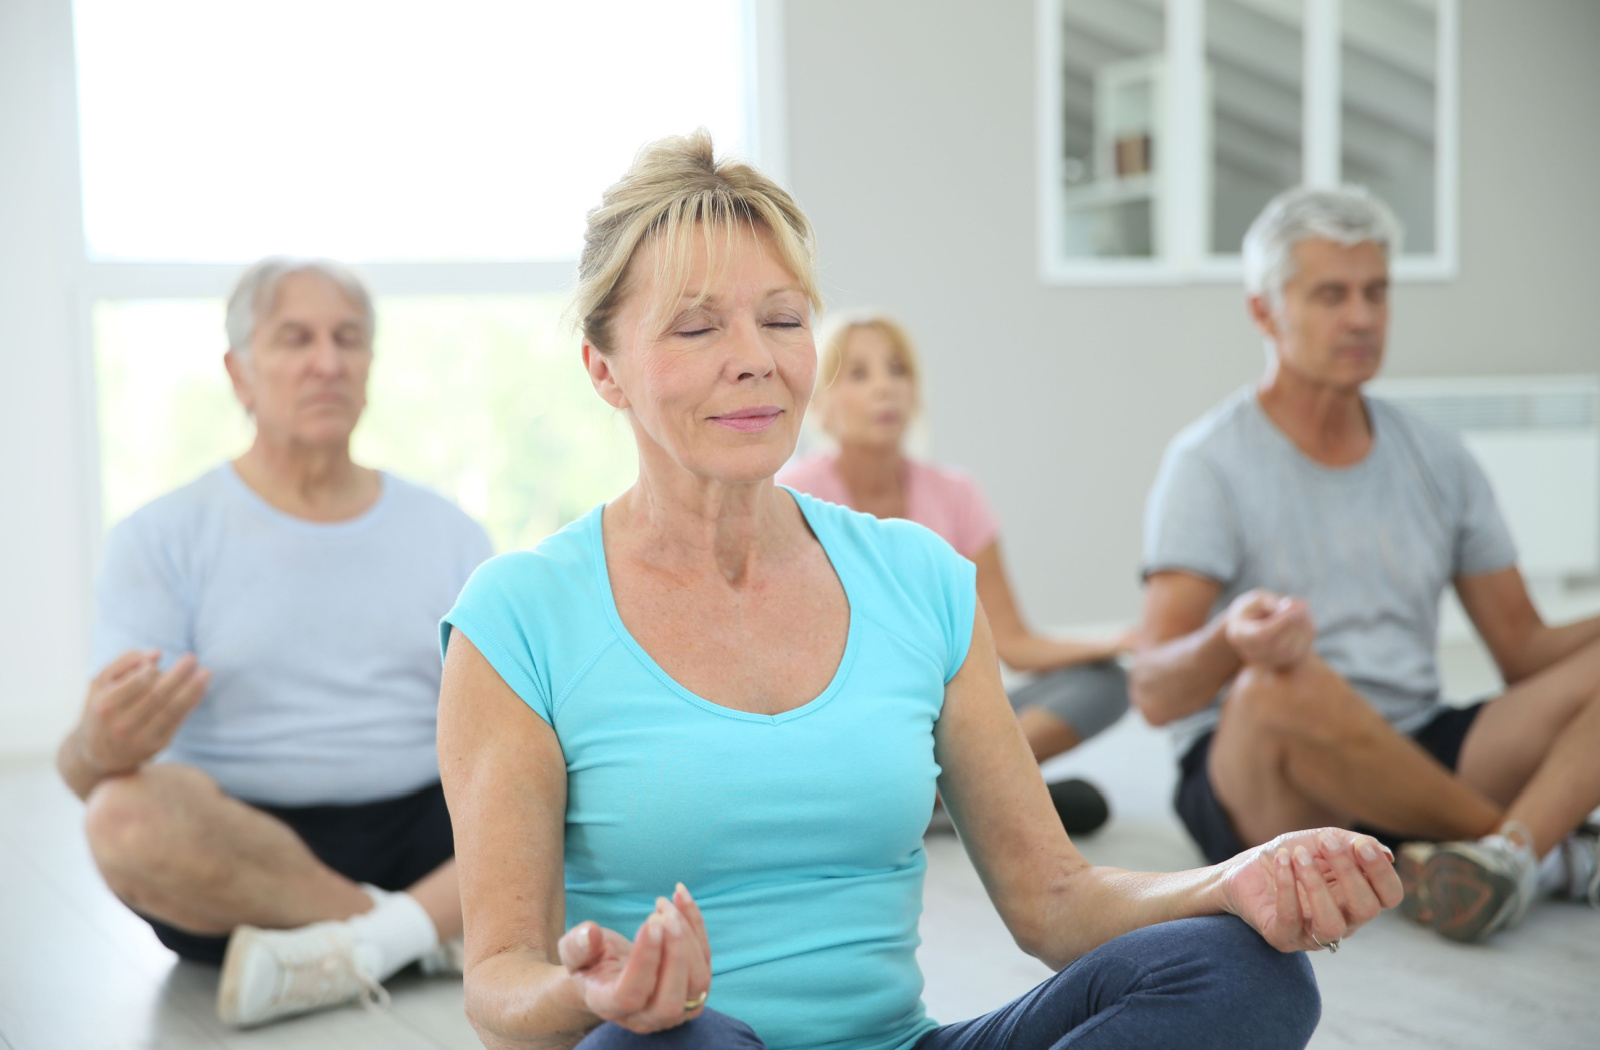 A group of older adults with closed eyes practicing yoga and sitting on yoga mats